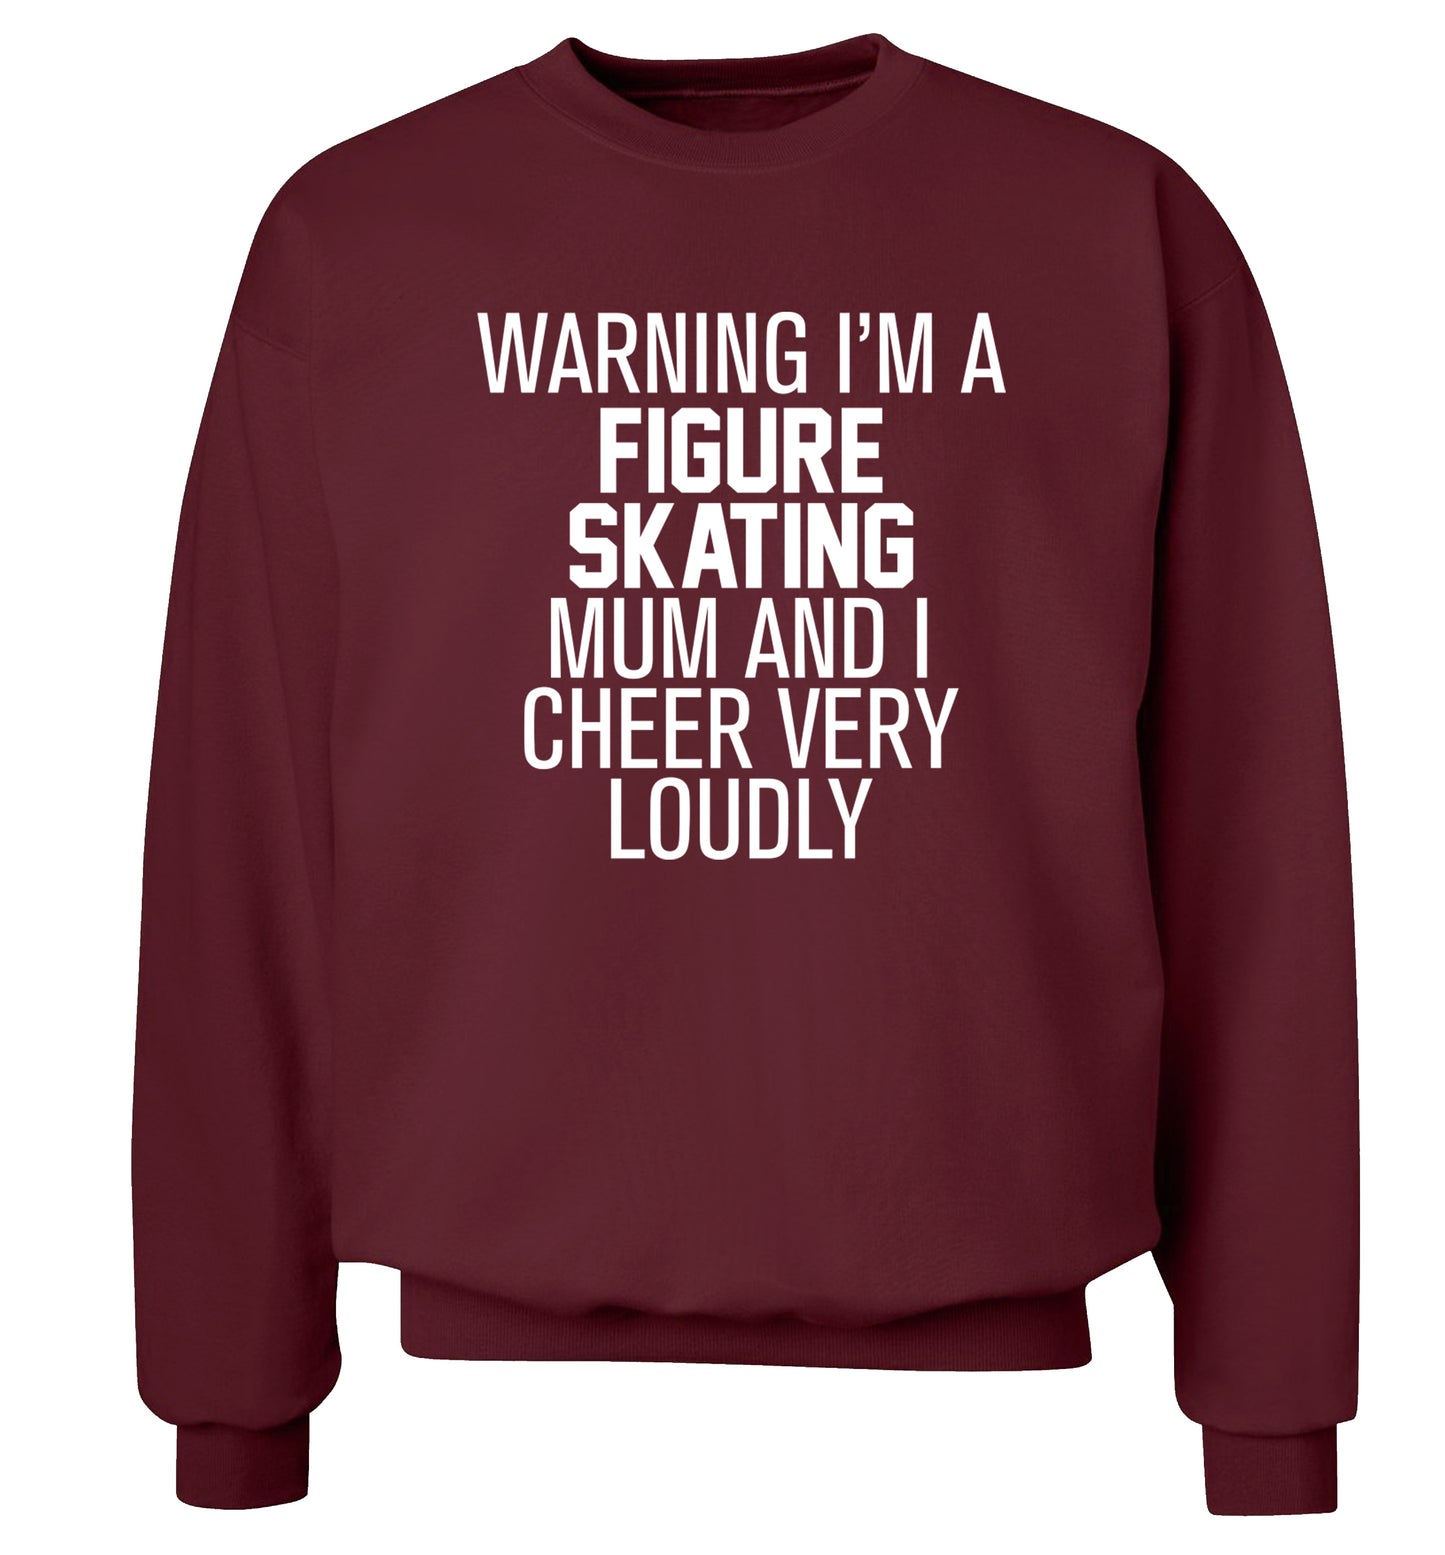 Warning I'm a figure skating mum and I cheer very loudly Adult's unisexmaroon Sweater 2XL